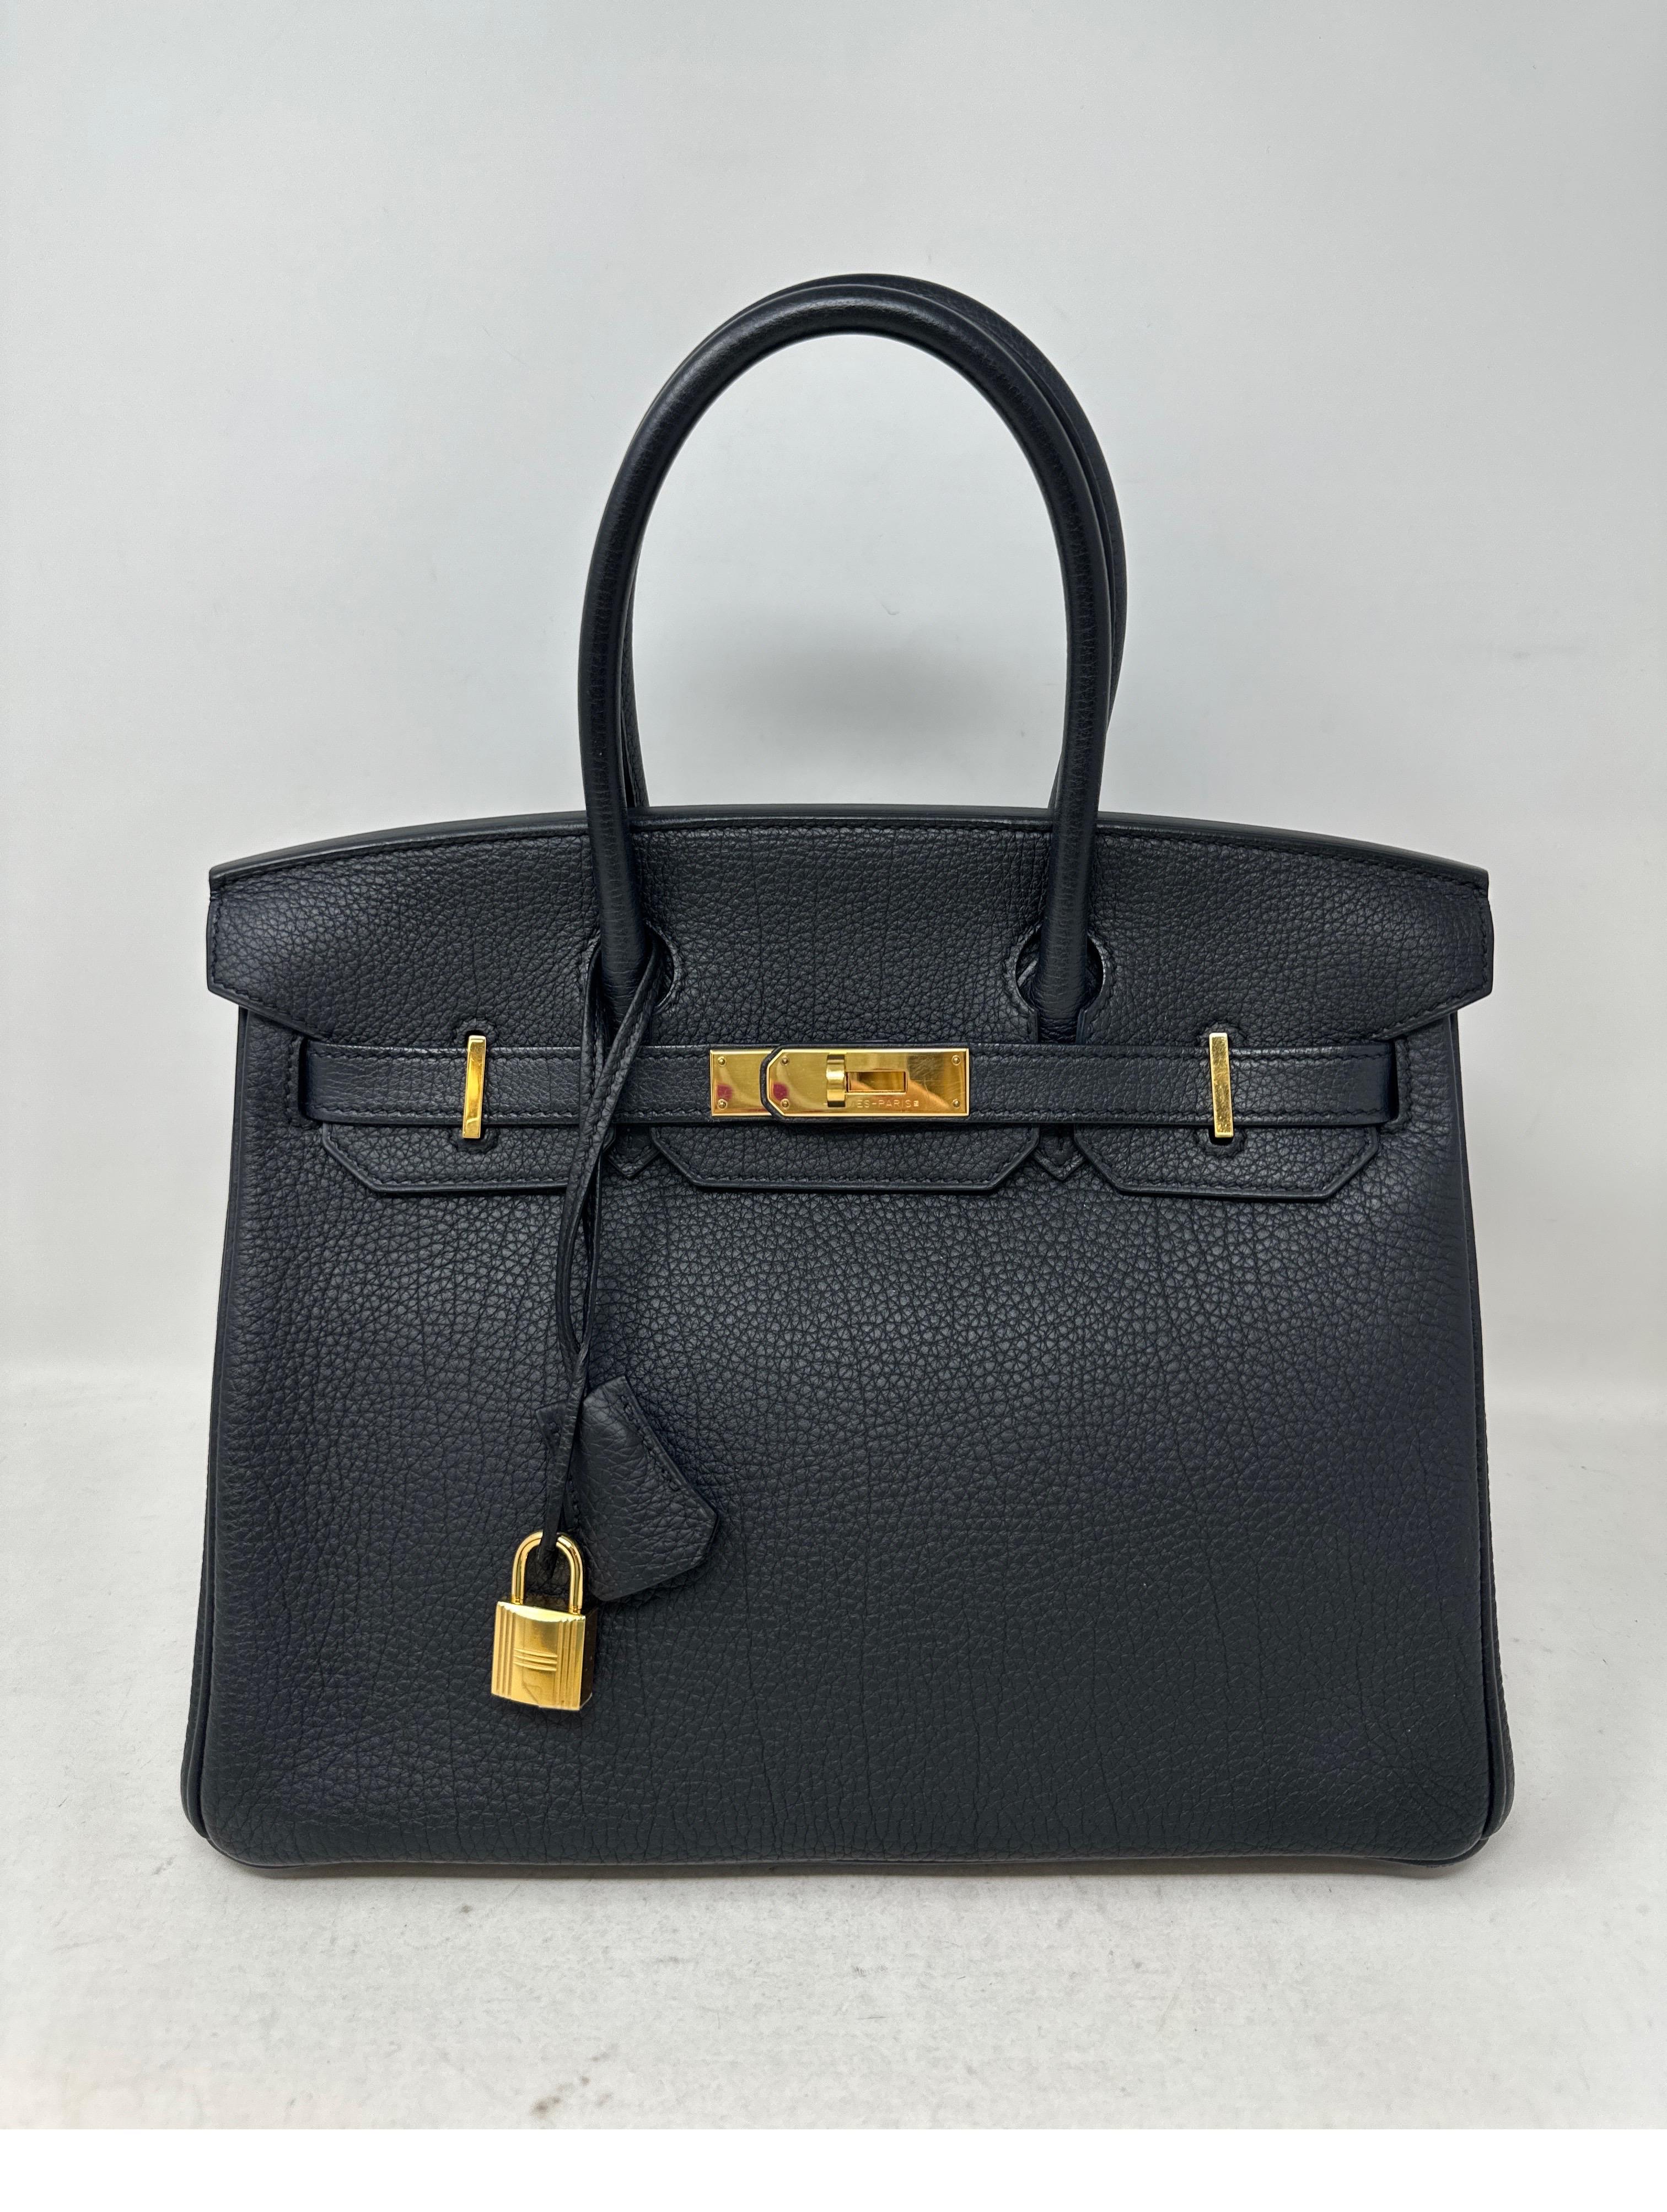 Hermes Black Birkin 30 Bag. Excellent condition togo leather Birkin. Gold hardware. The most wanted combination color and size. Full set. Includes clochette, lock, keys, and dust bag and box. Guaranteed authentic. Don't miss out. 